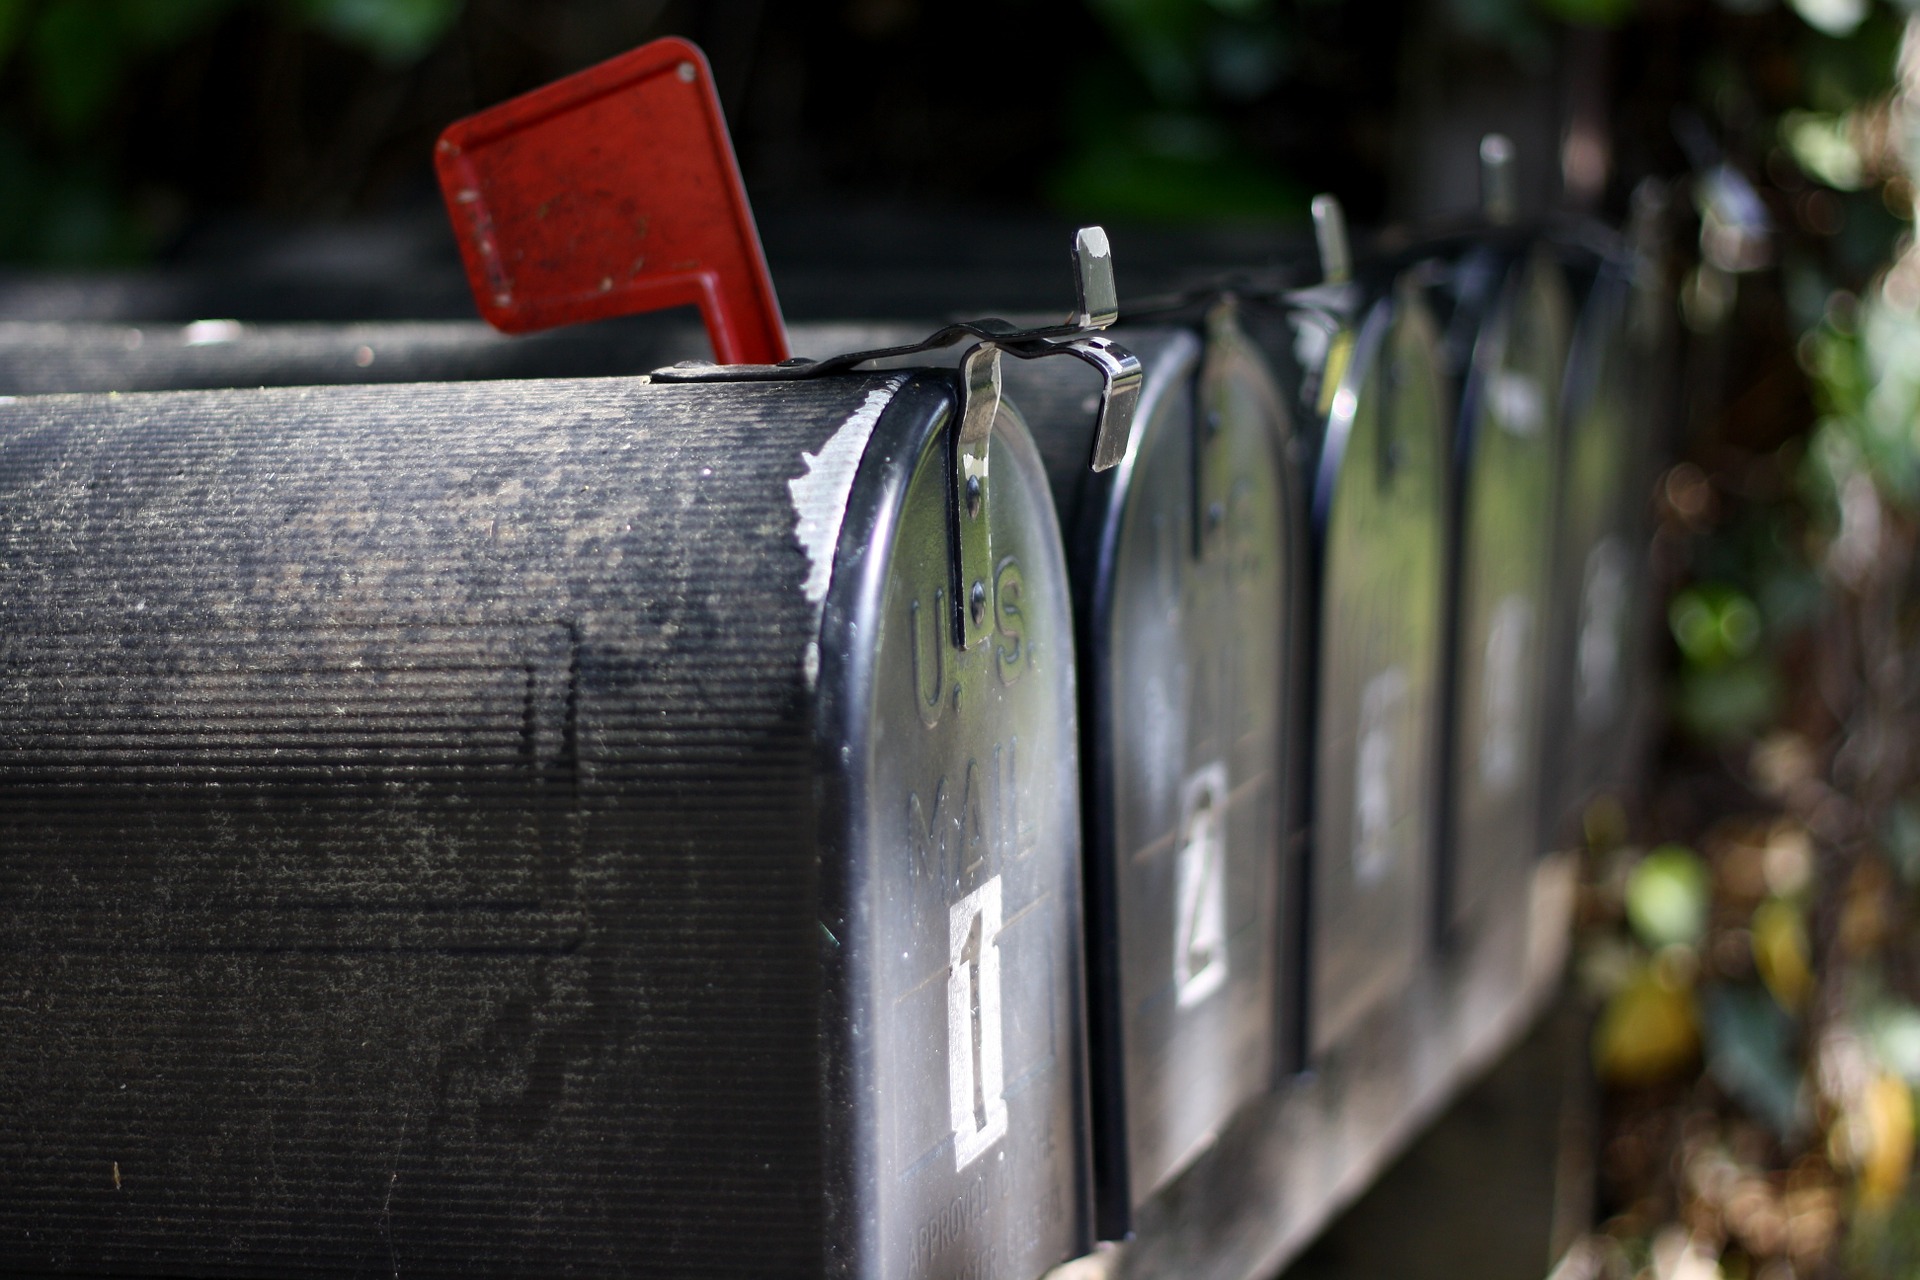 Make sure that you change your address at all official locations to receive your mail at your new home.